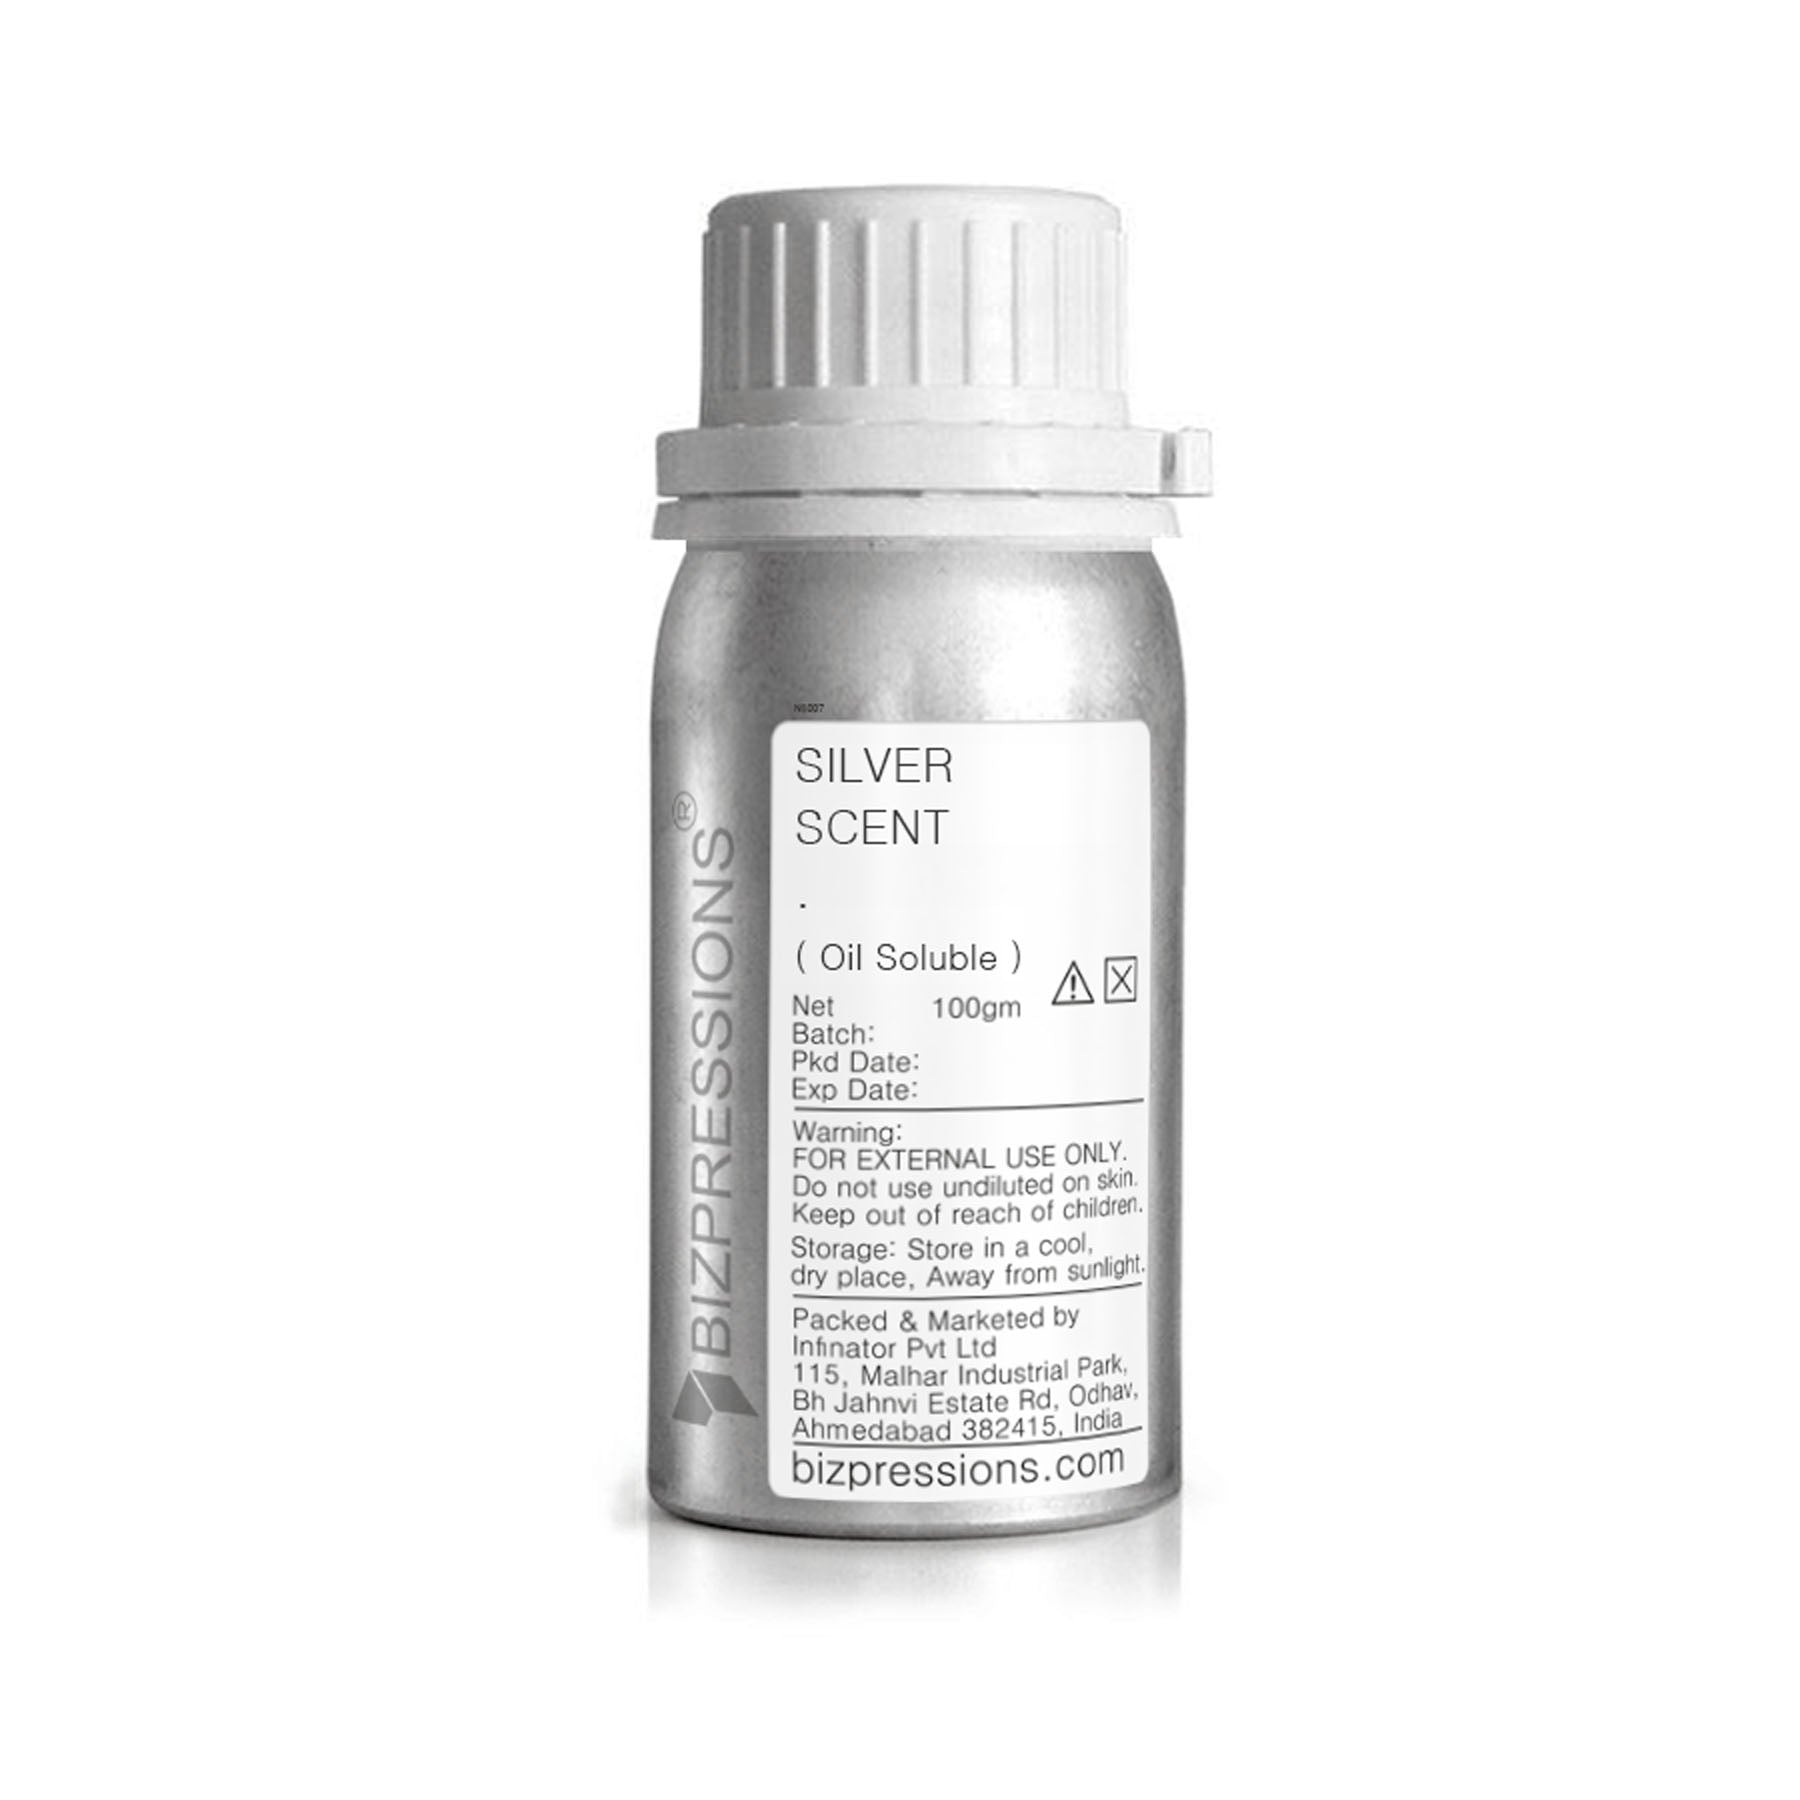 SILVER SCENT - Fragrance ( Oil Soluble ) - 100 gm